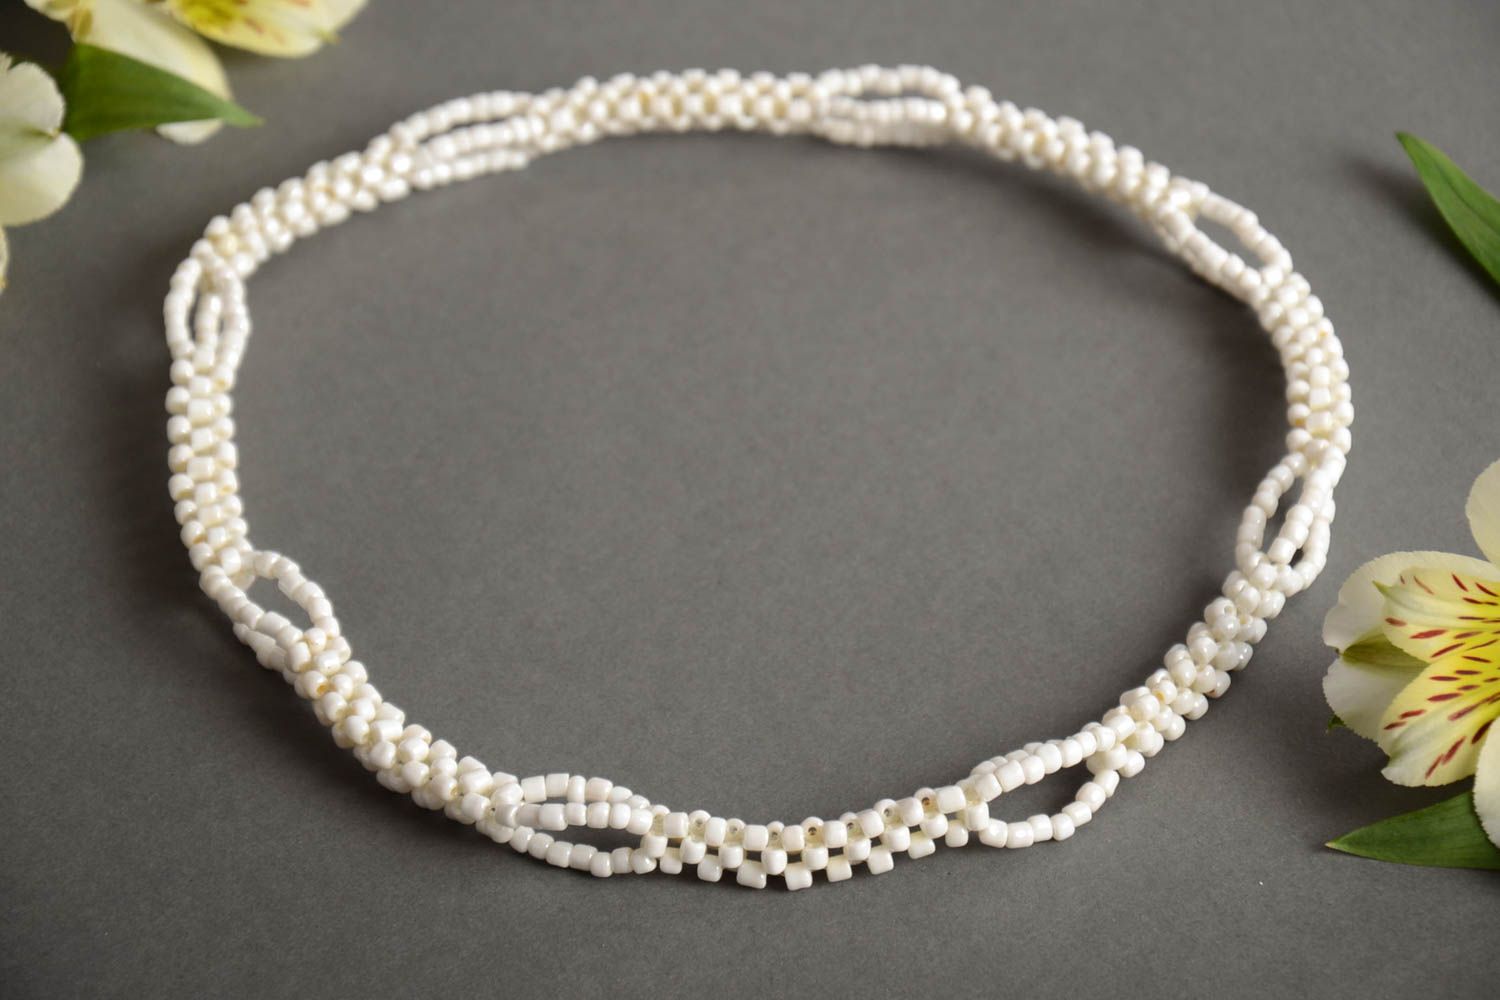 Handmade designer women's thin laconic crocheted beaded necklace of white color  photo 1